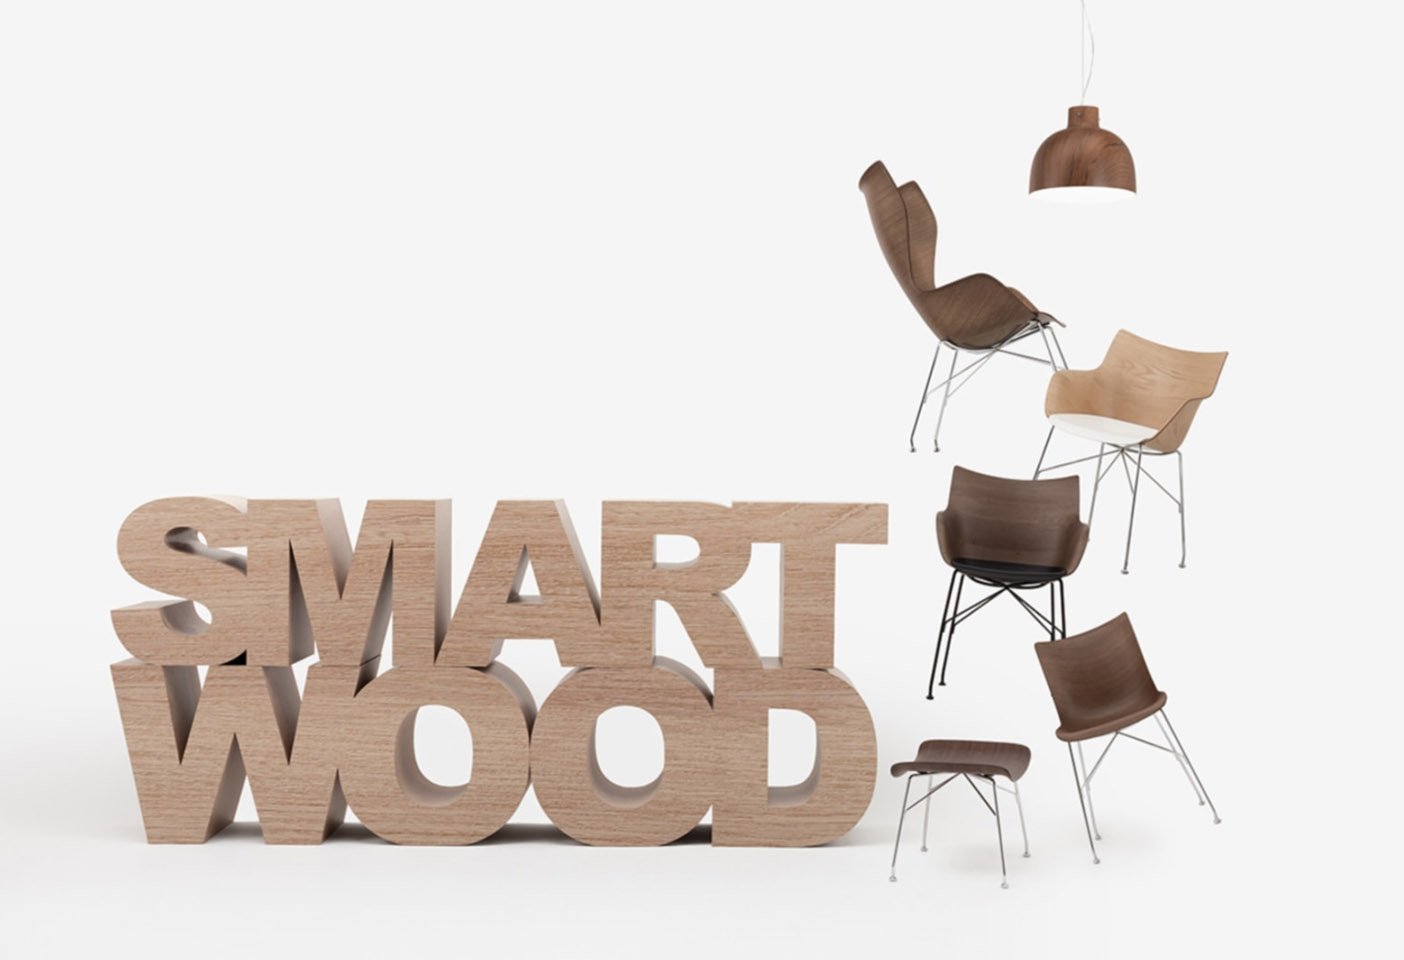   The philosophy behind the Smart Wood Collection by Kartell is to use the least amount of wood possible and source all of the material from FSC-certified forests that allow the company to guarantee its provenance and contribute to the proper use of forest resources. Photo c/o Kartell. 